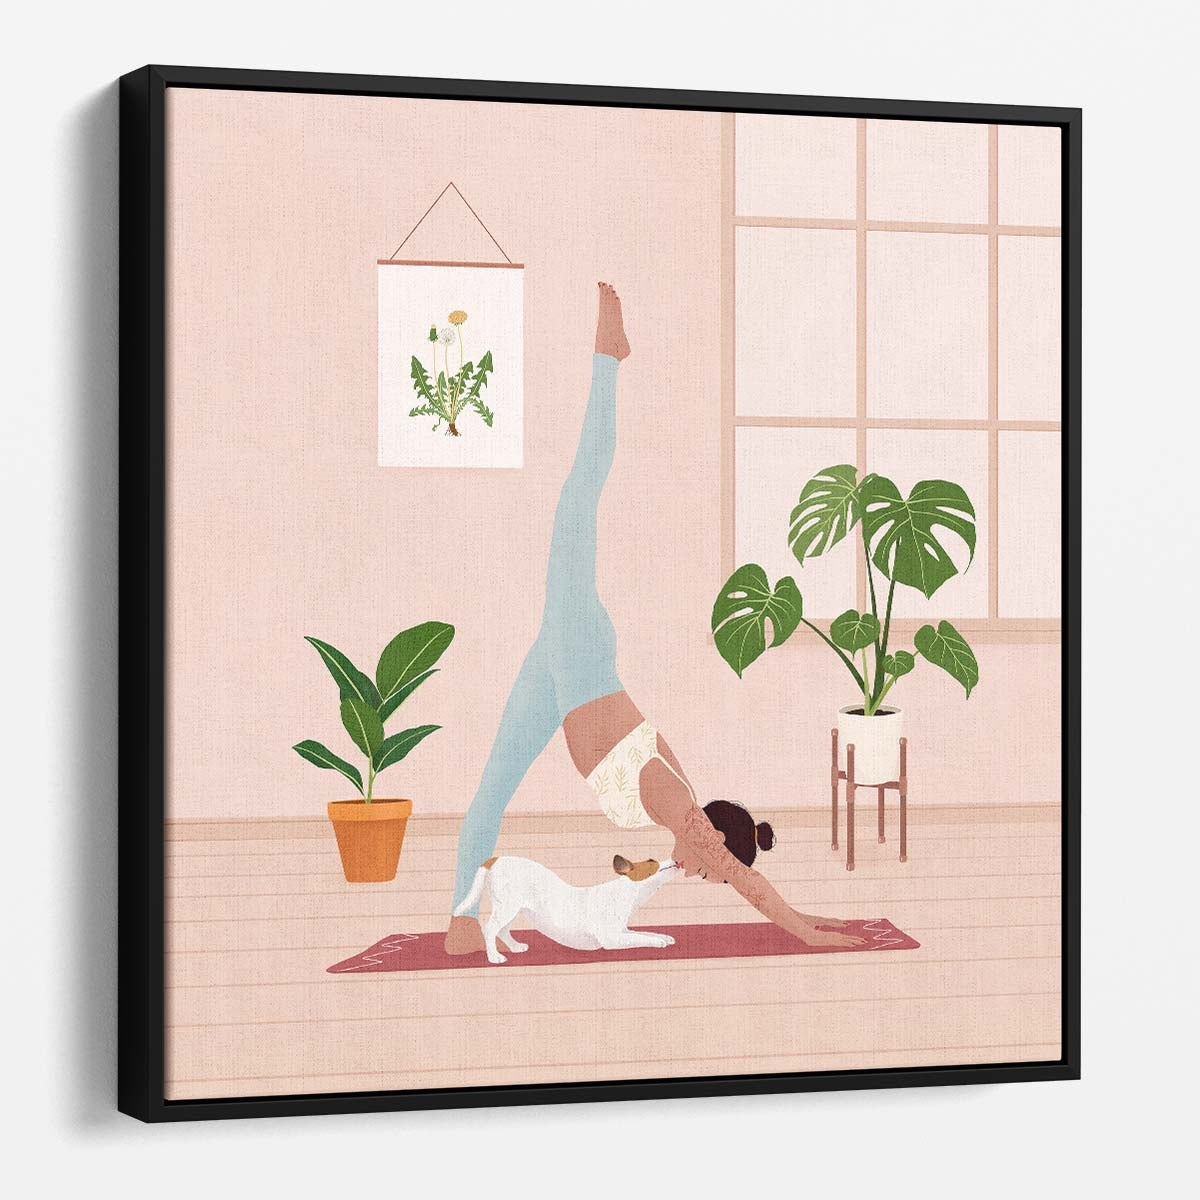 Downward Dog Pose Yoga Woman Illustration Wall Art by Luxuriance Designs. Made in USA.